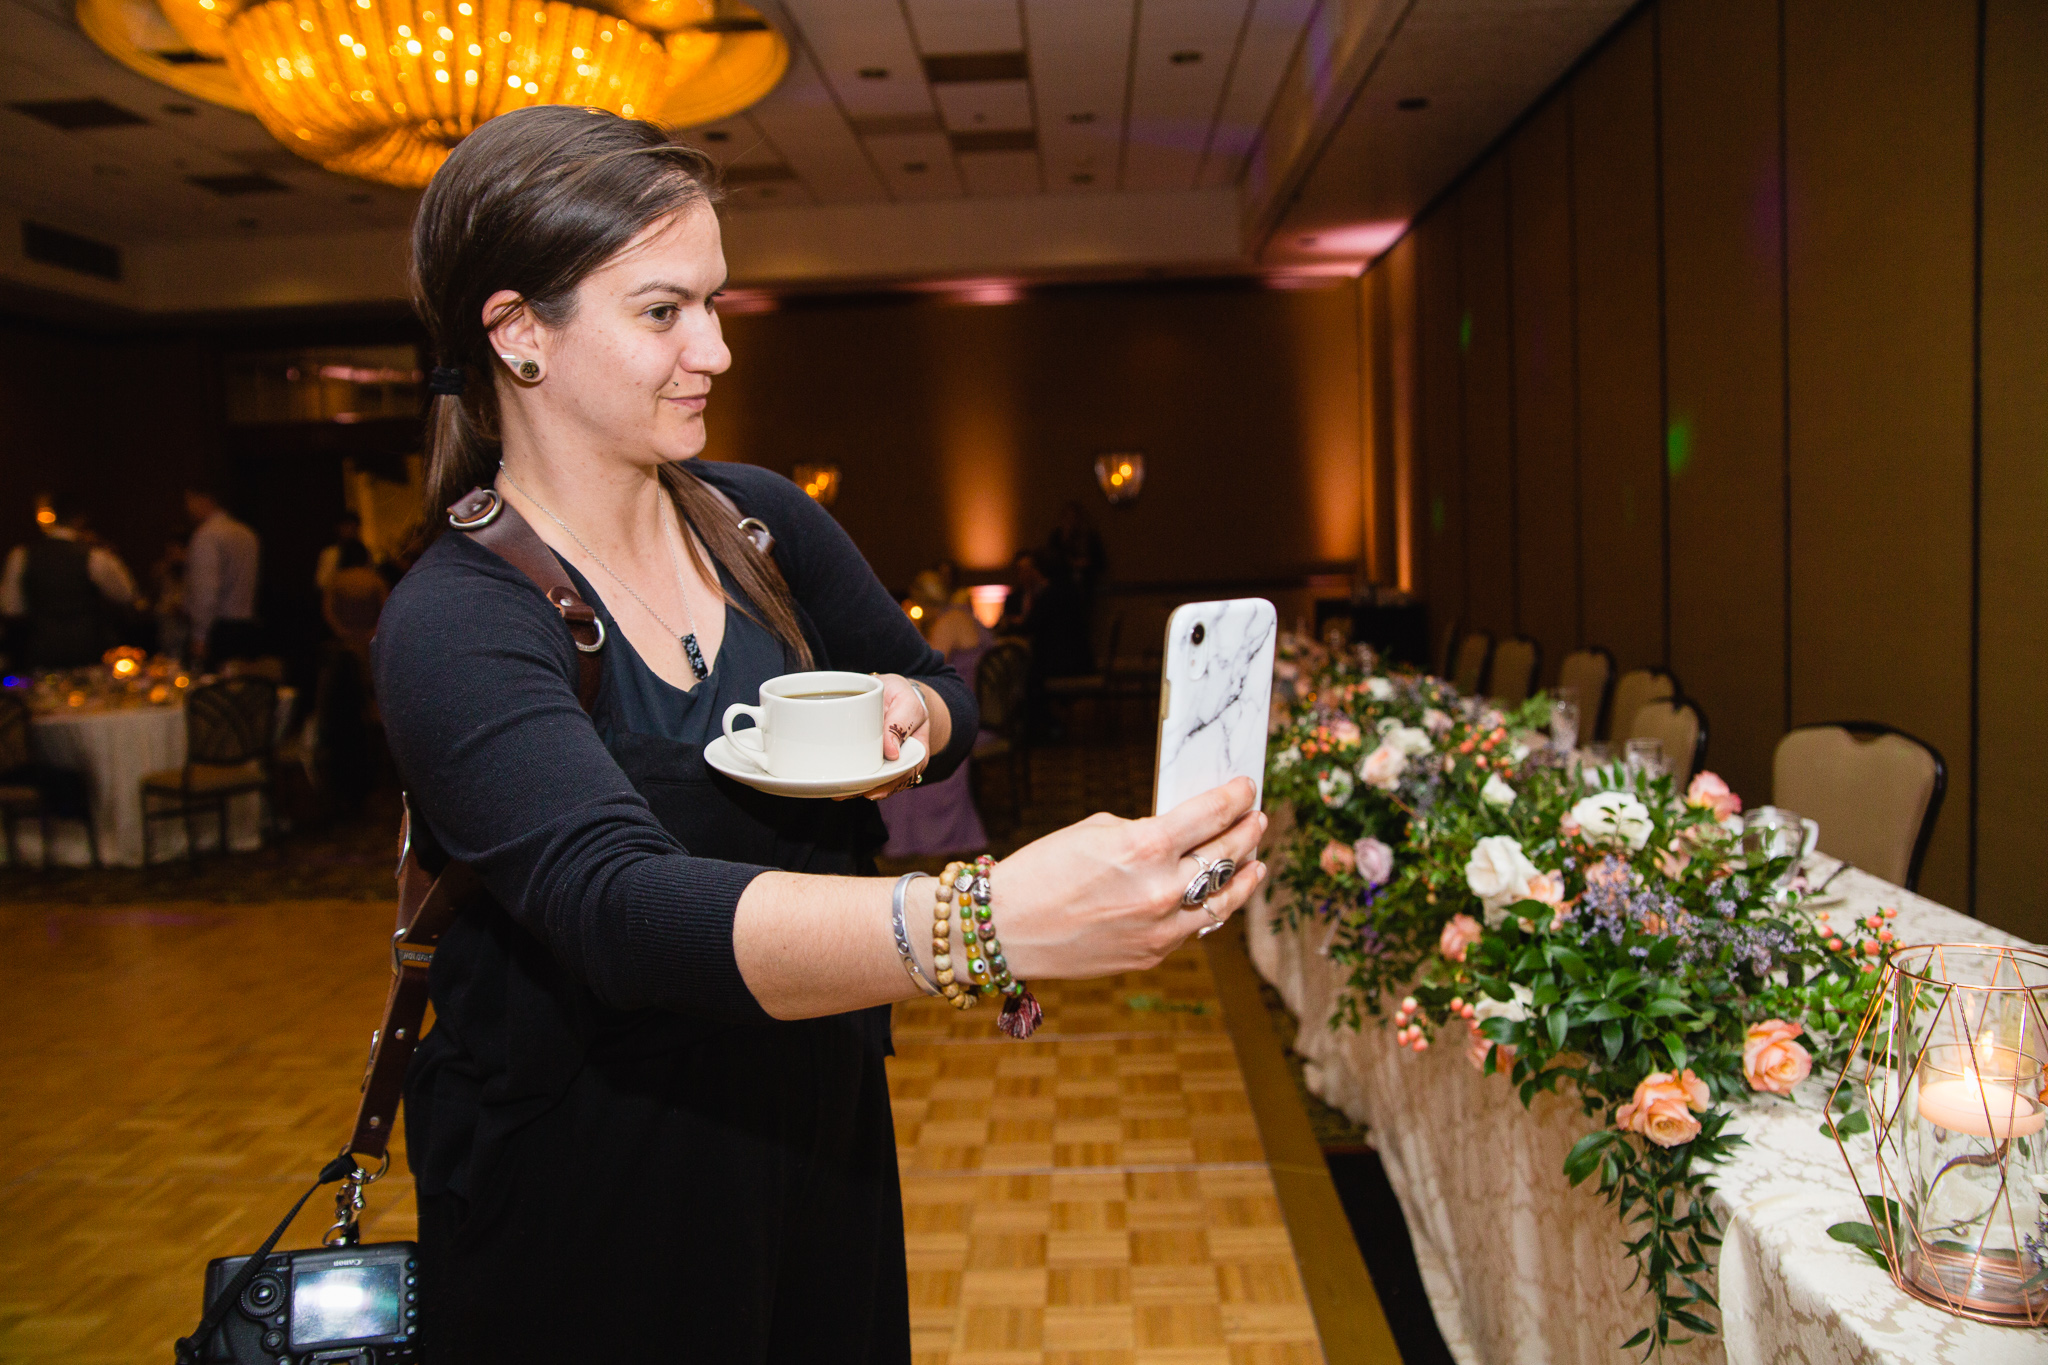 Jenn of PMA Photography taking a selfie with coffee at a reception.